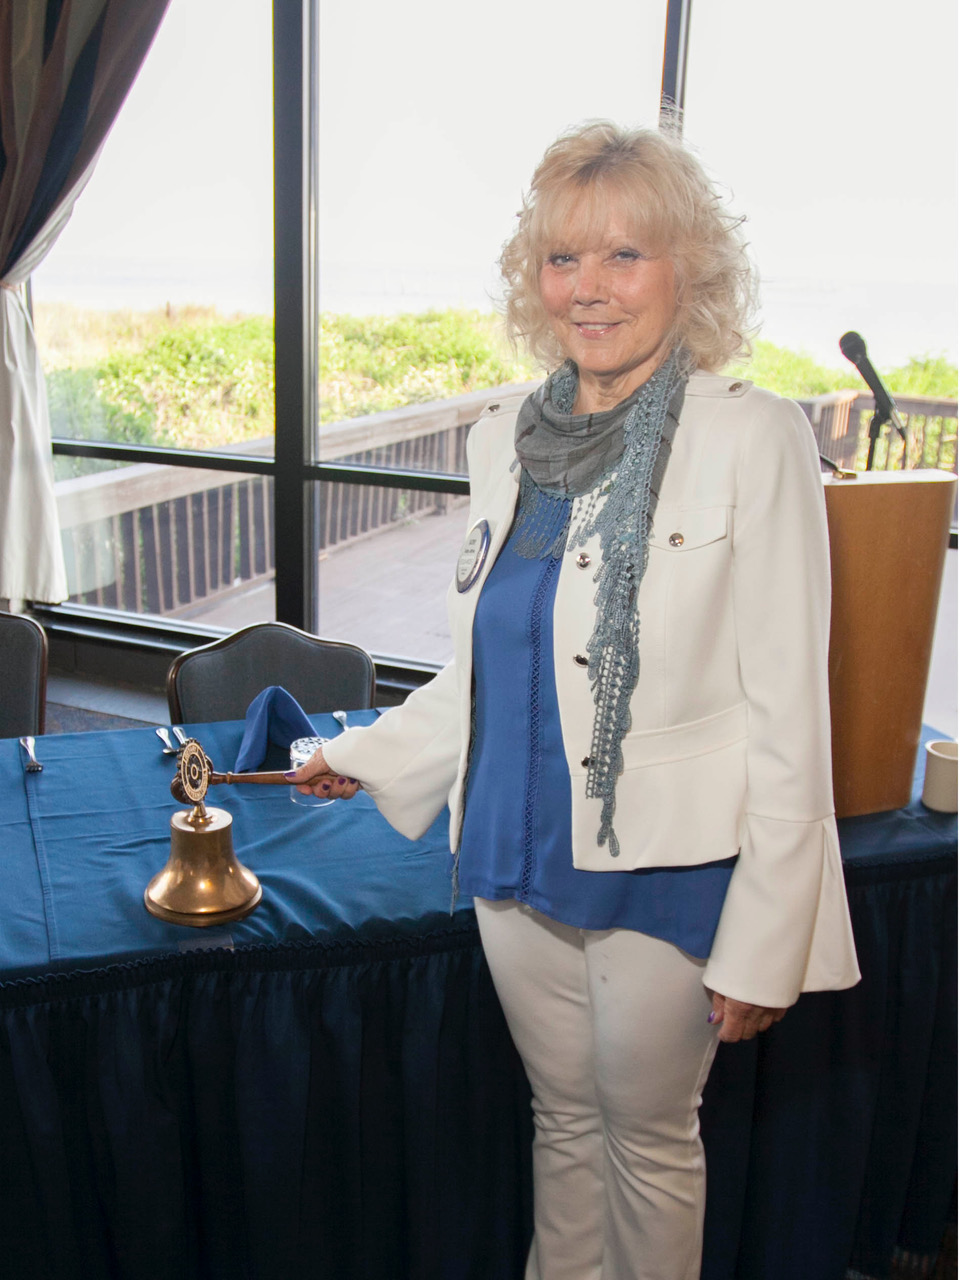 Kathy rings the bell-5677.jpeg